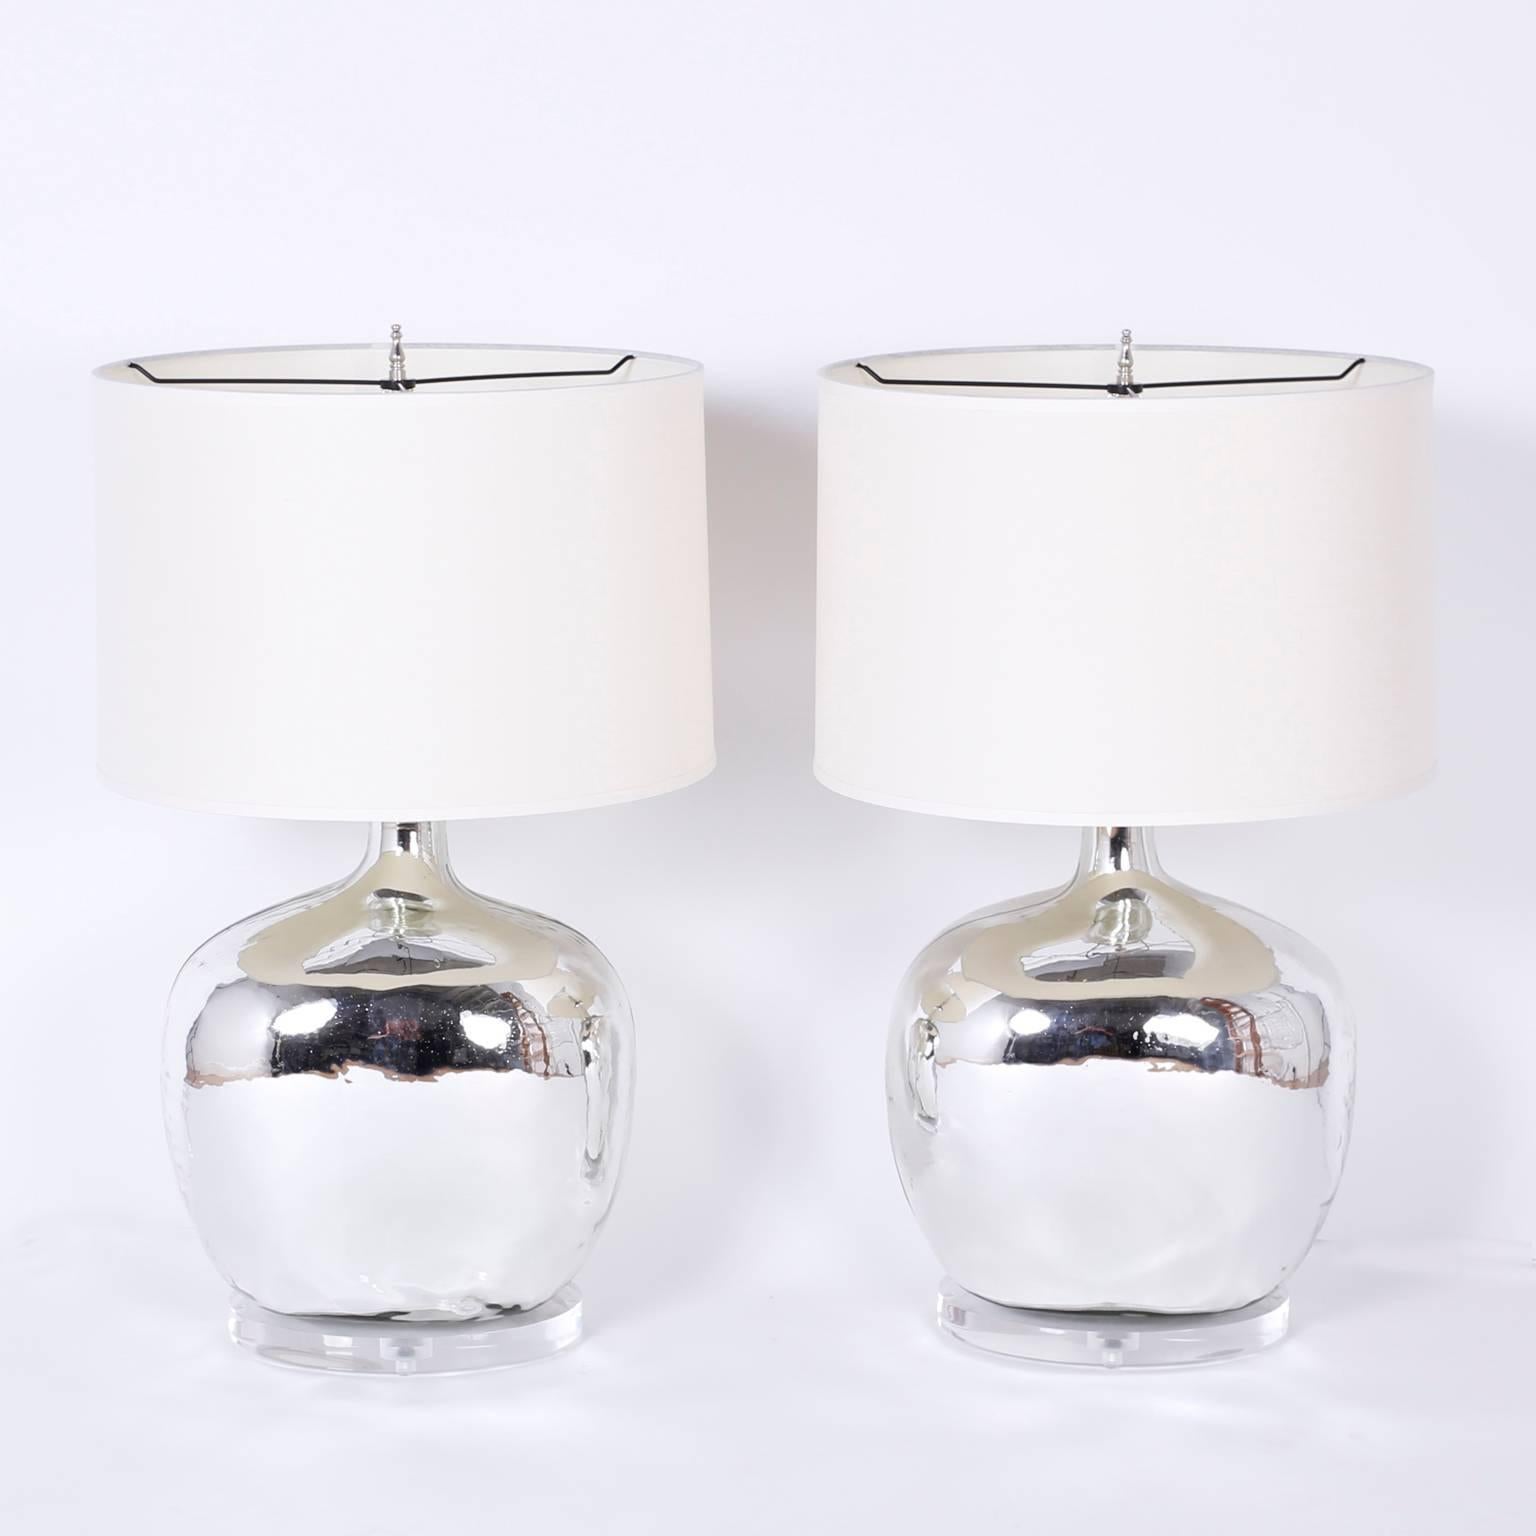 Pair of exclusive silver glass table lamps custom designed by F. S. Henemader. Featuring a chic handblown form crafted with reverse mirrored glass and presented on custom Lucite bases.
    